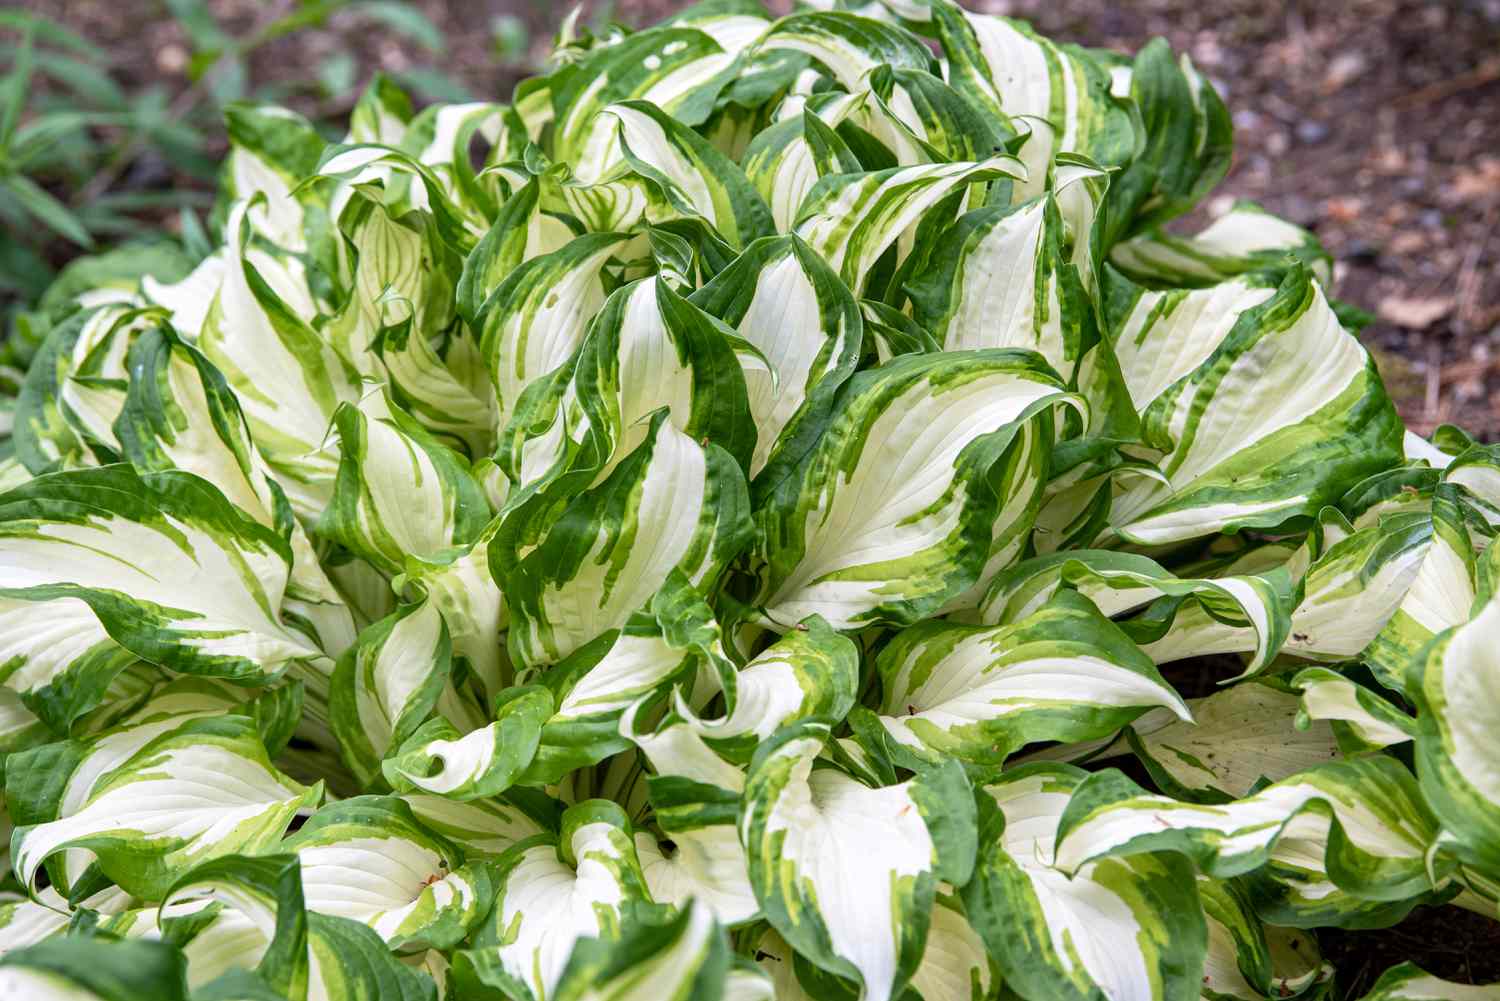 Hosta plant with variegated white and green leaves clustered in shade